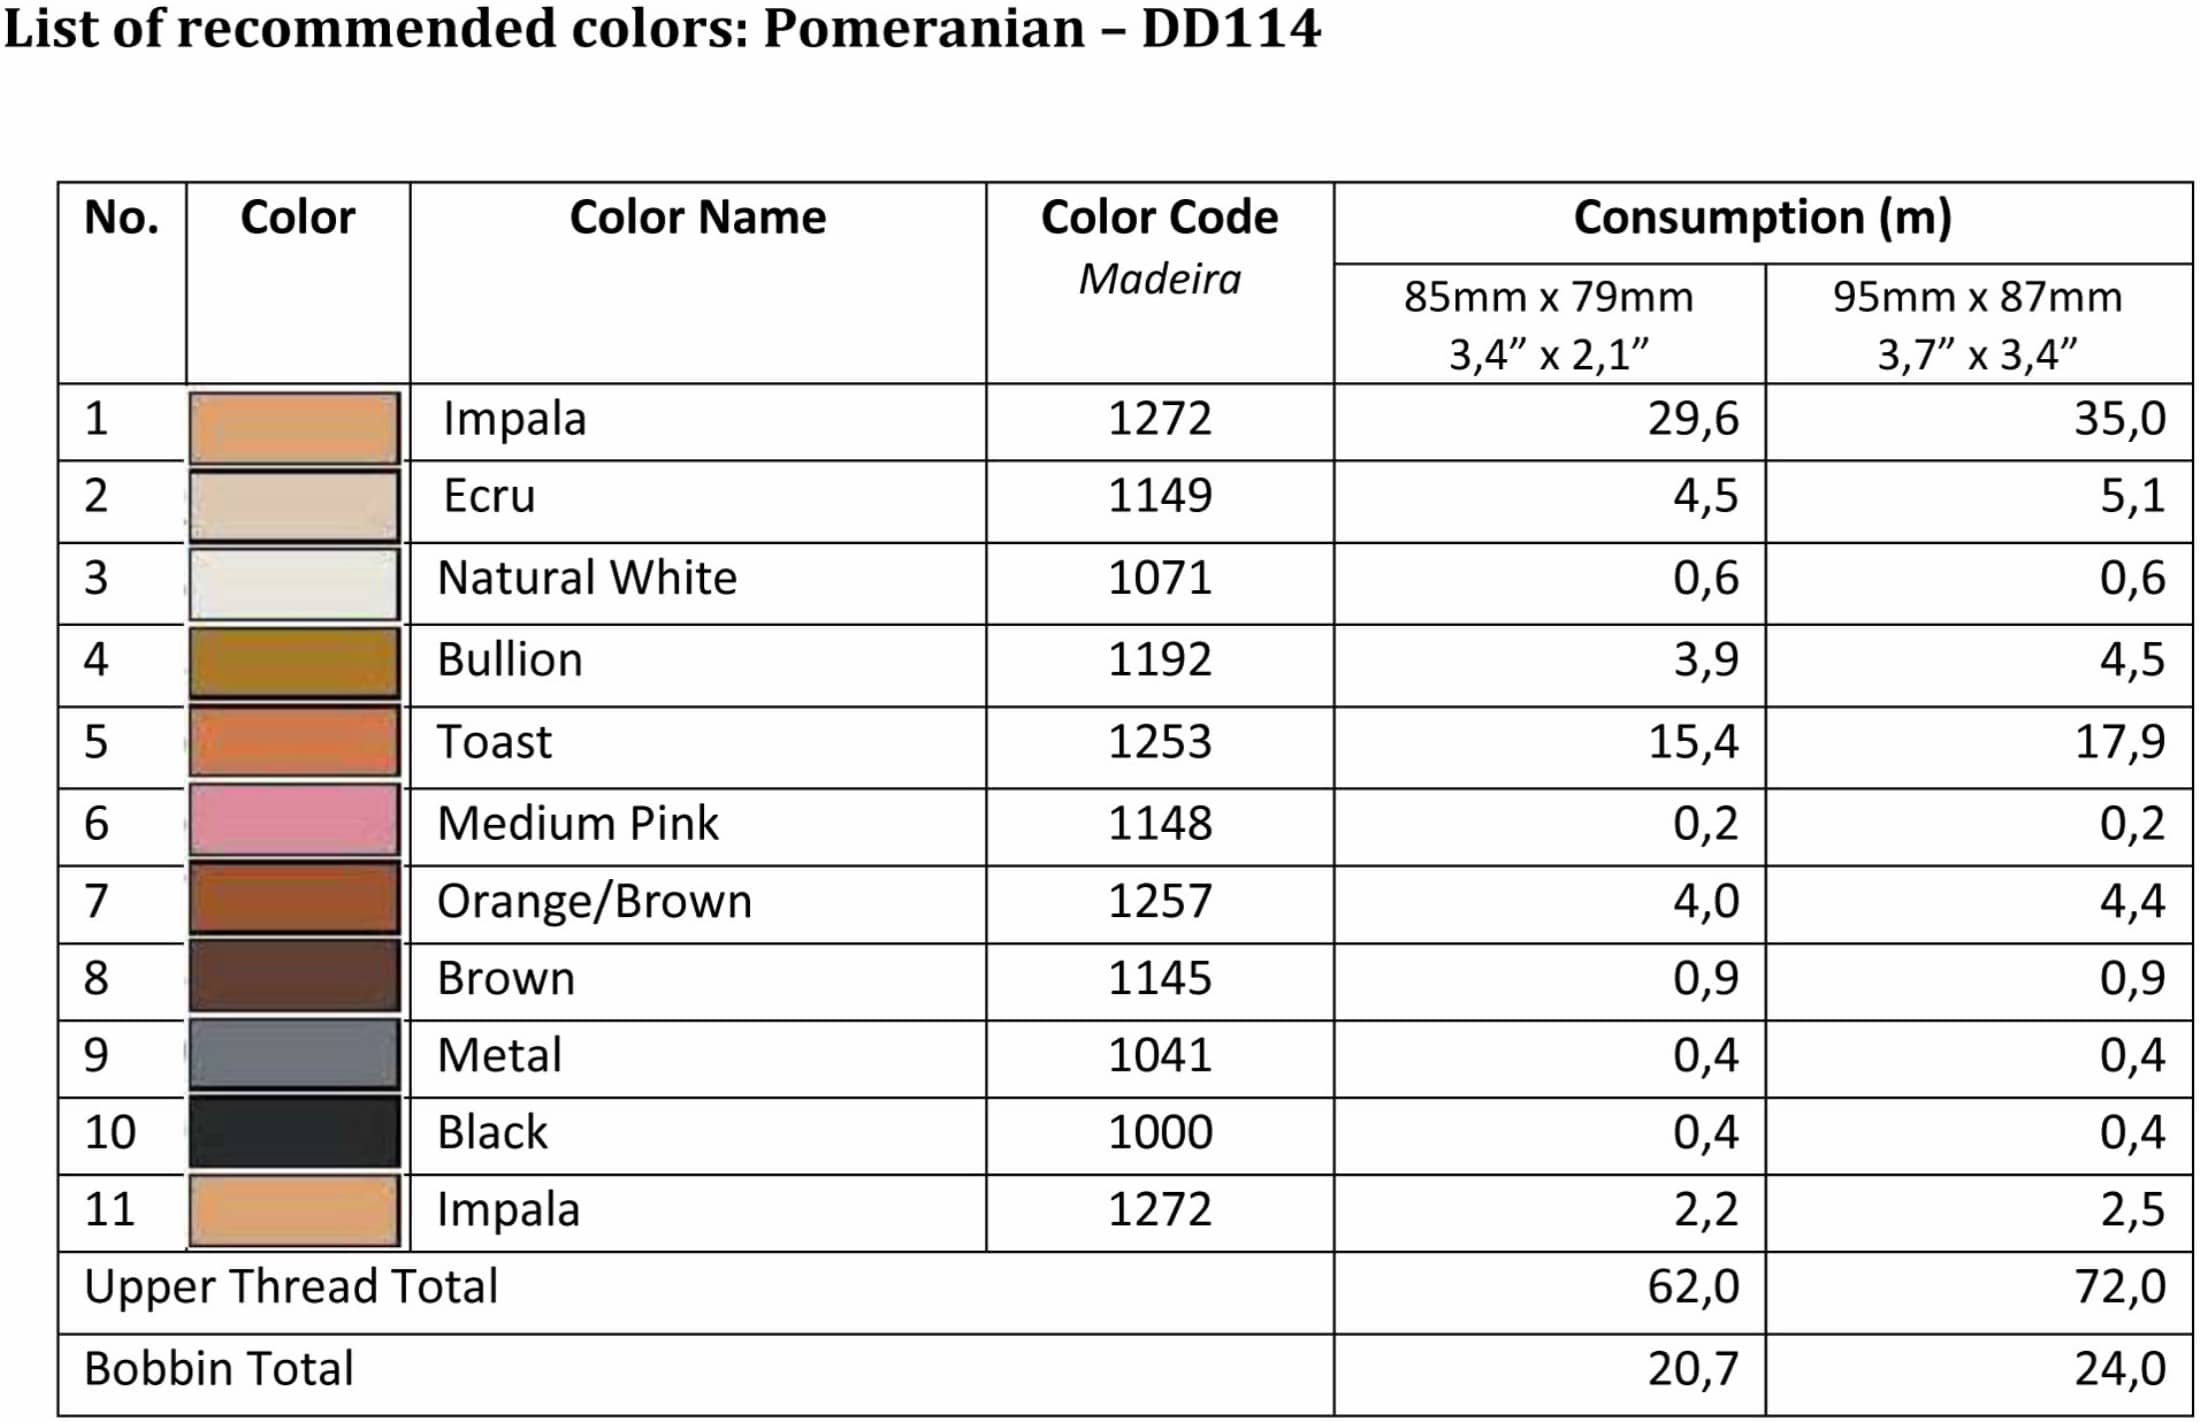 List of Recommended Colors - Pomeranian DD114